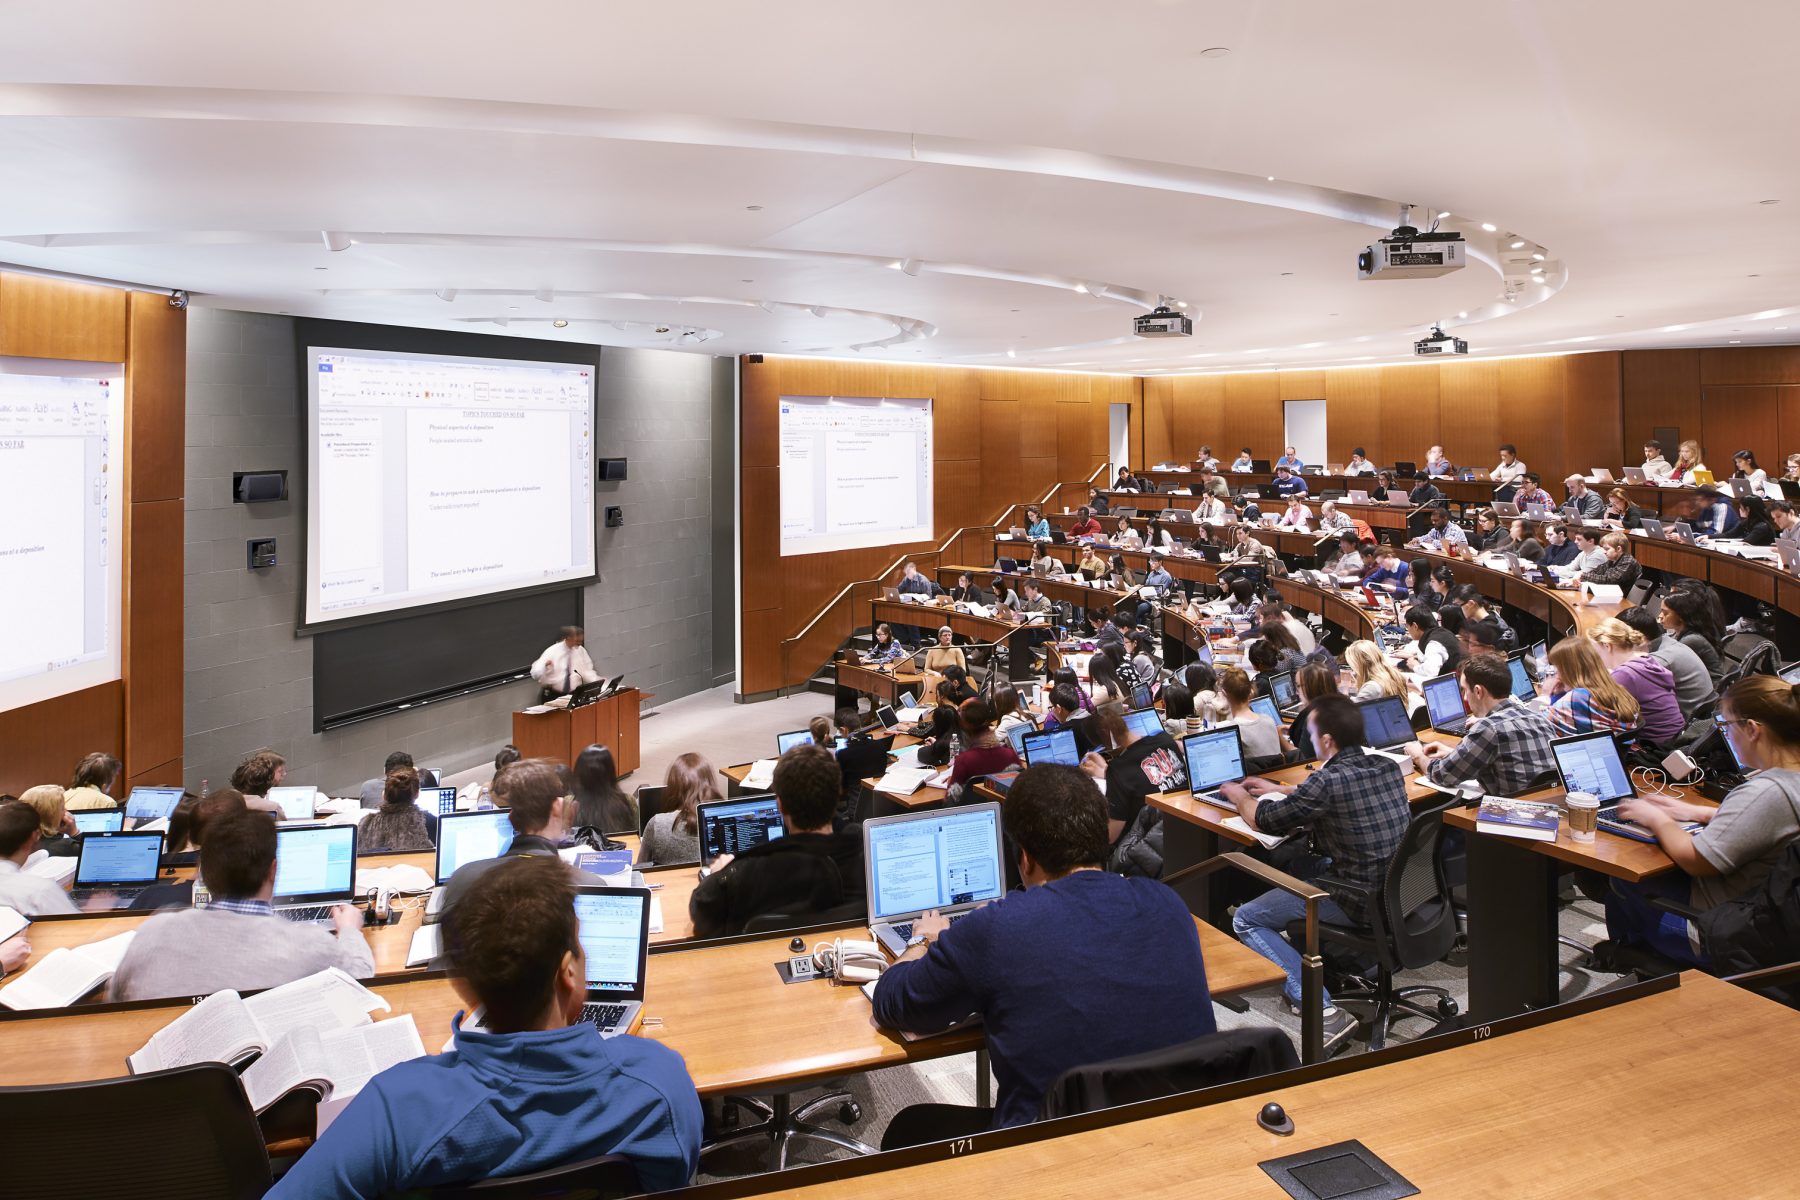 Cornell Law School Lecture Hall during a large class